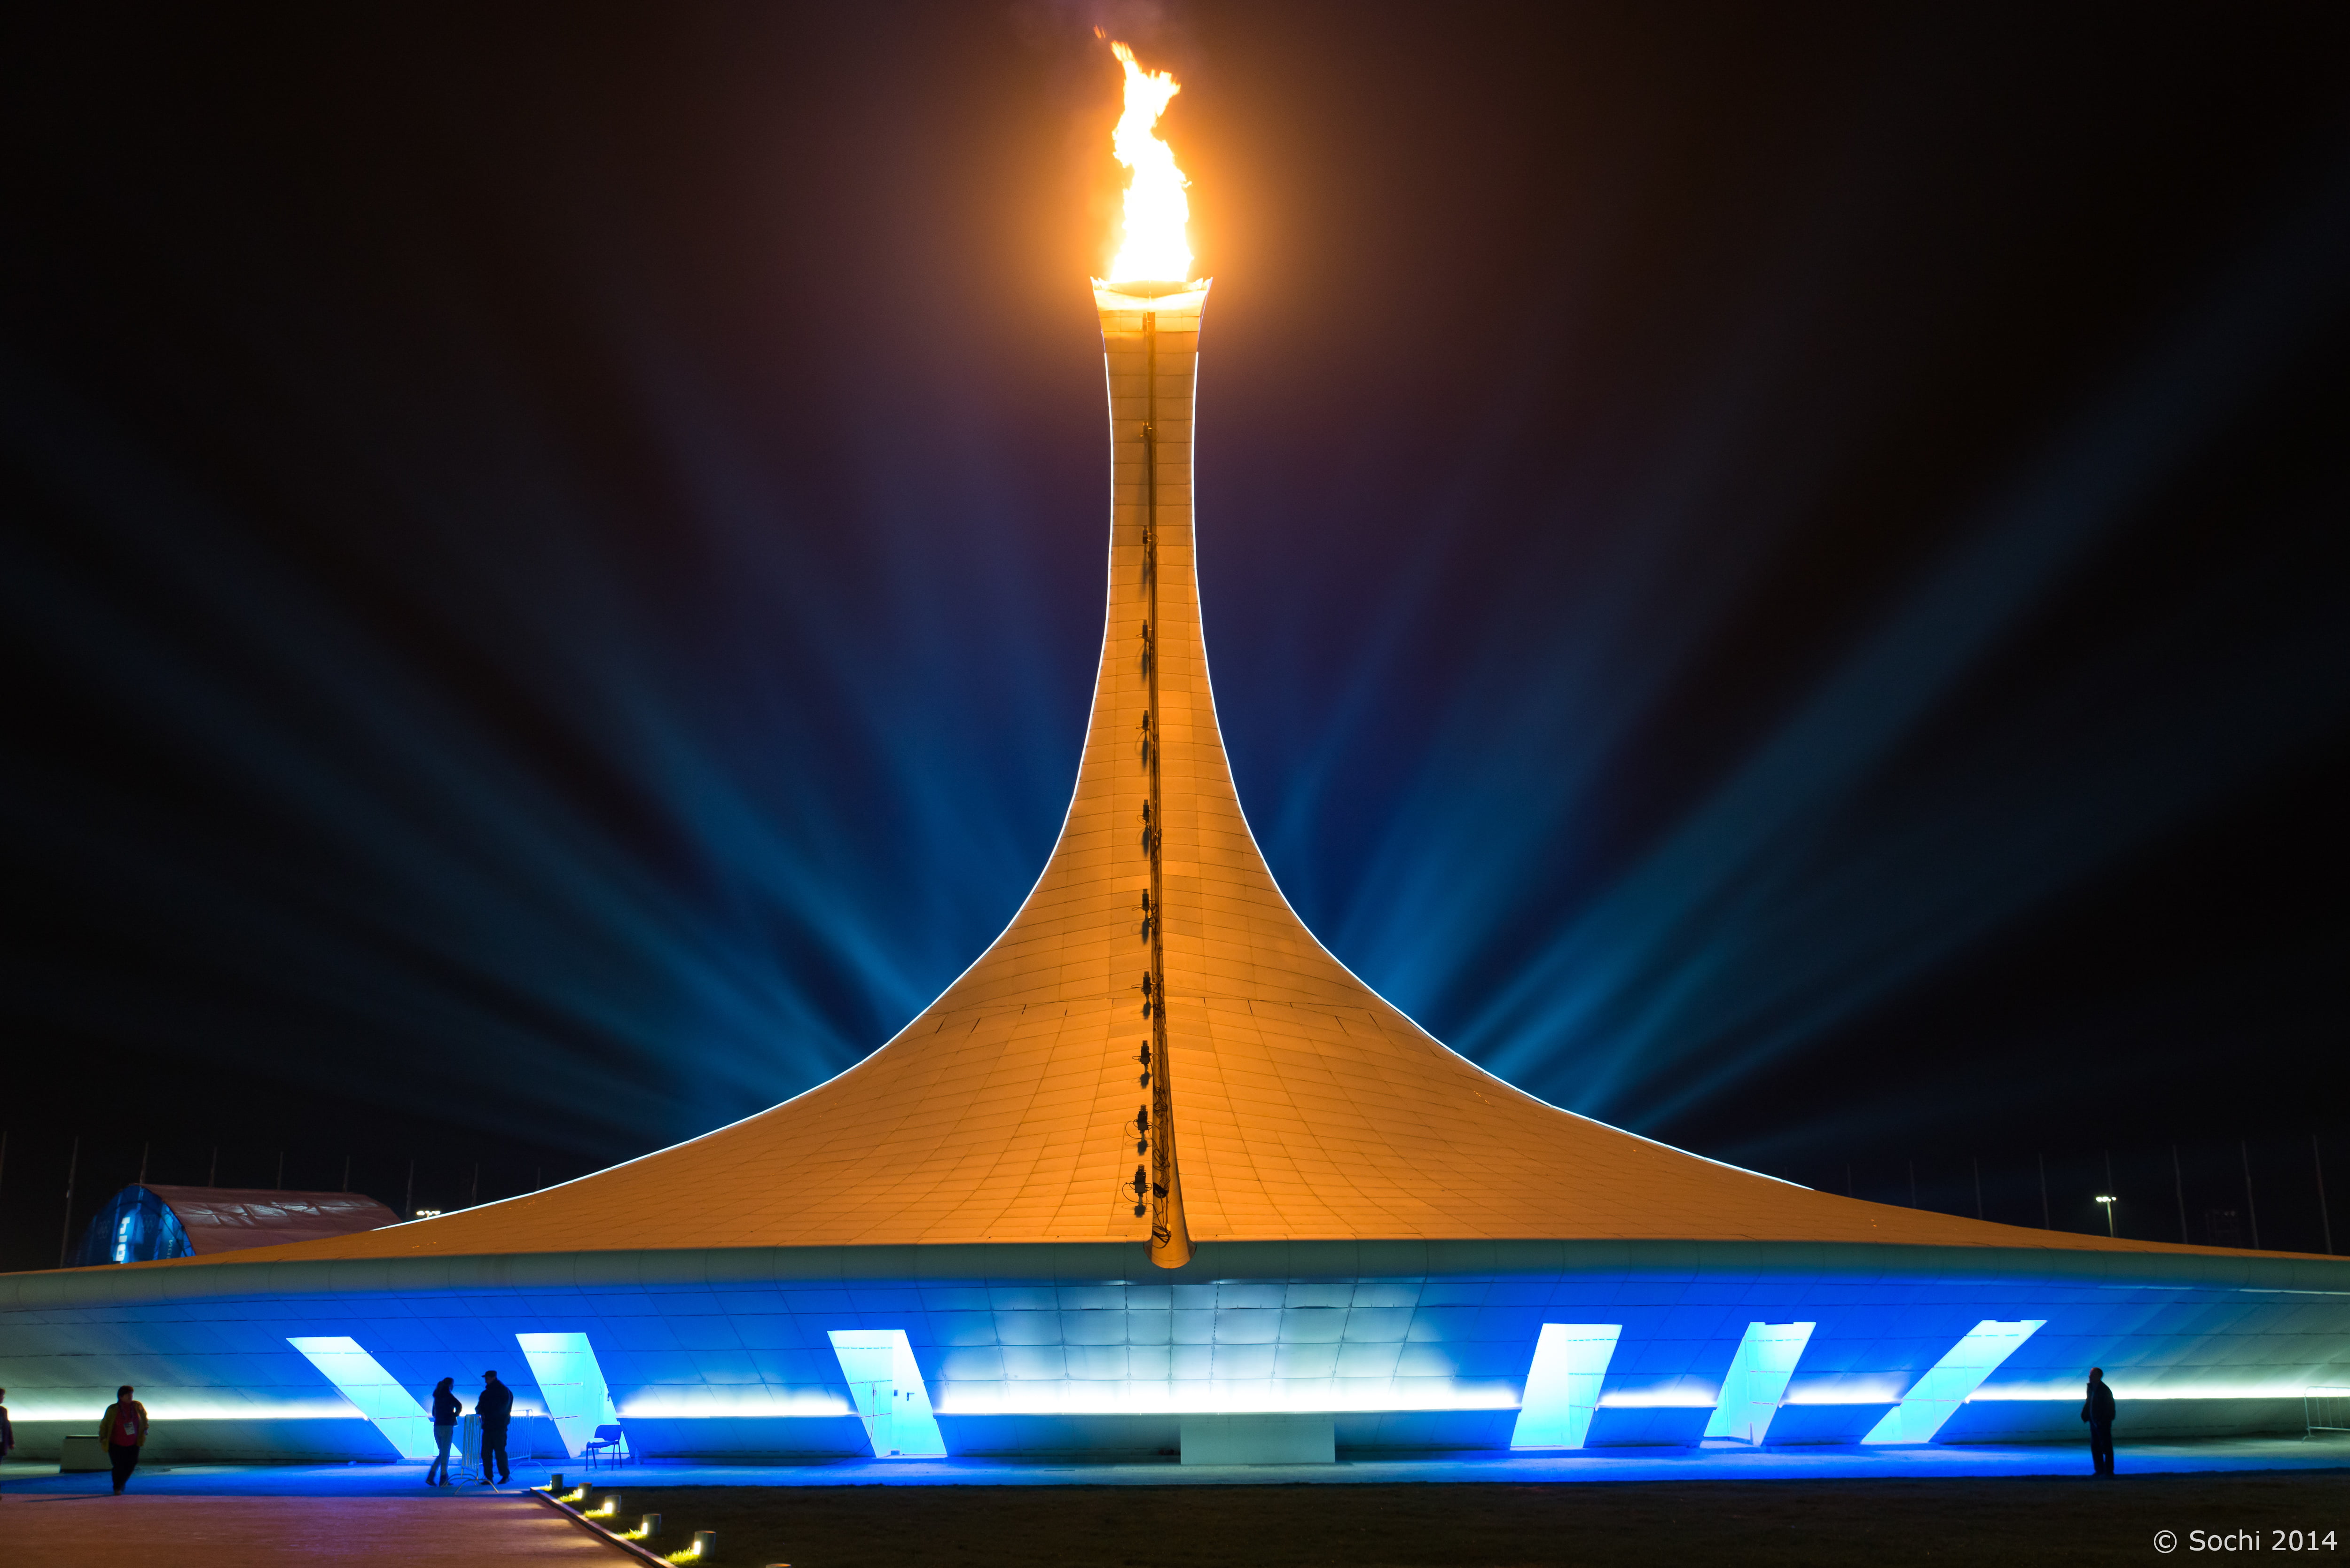 brown landmark structure, the city, game, Russia, Olympic, Sochi